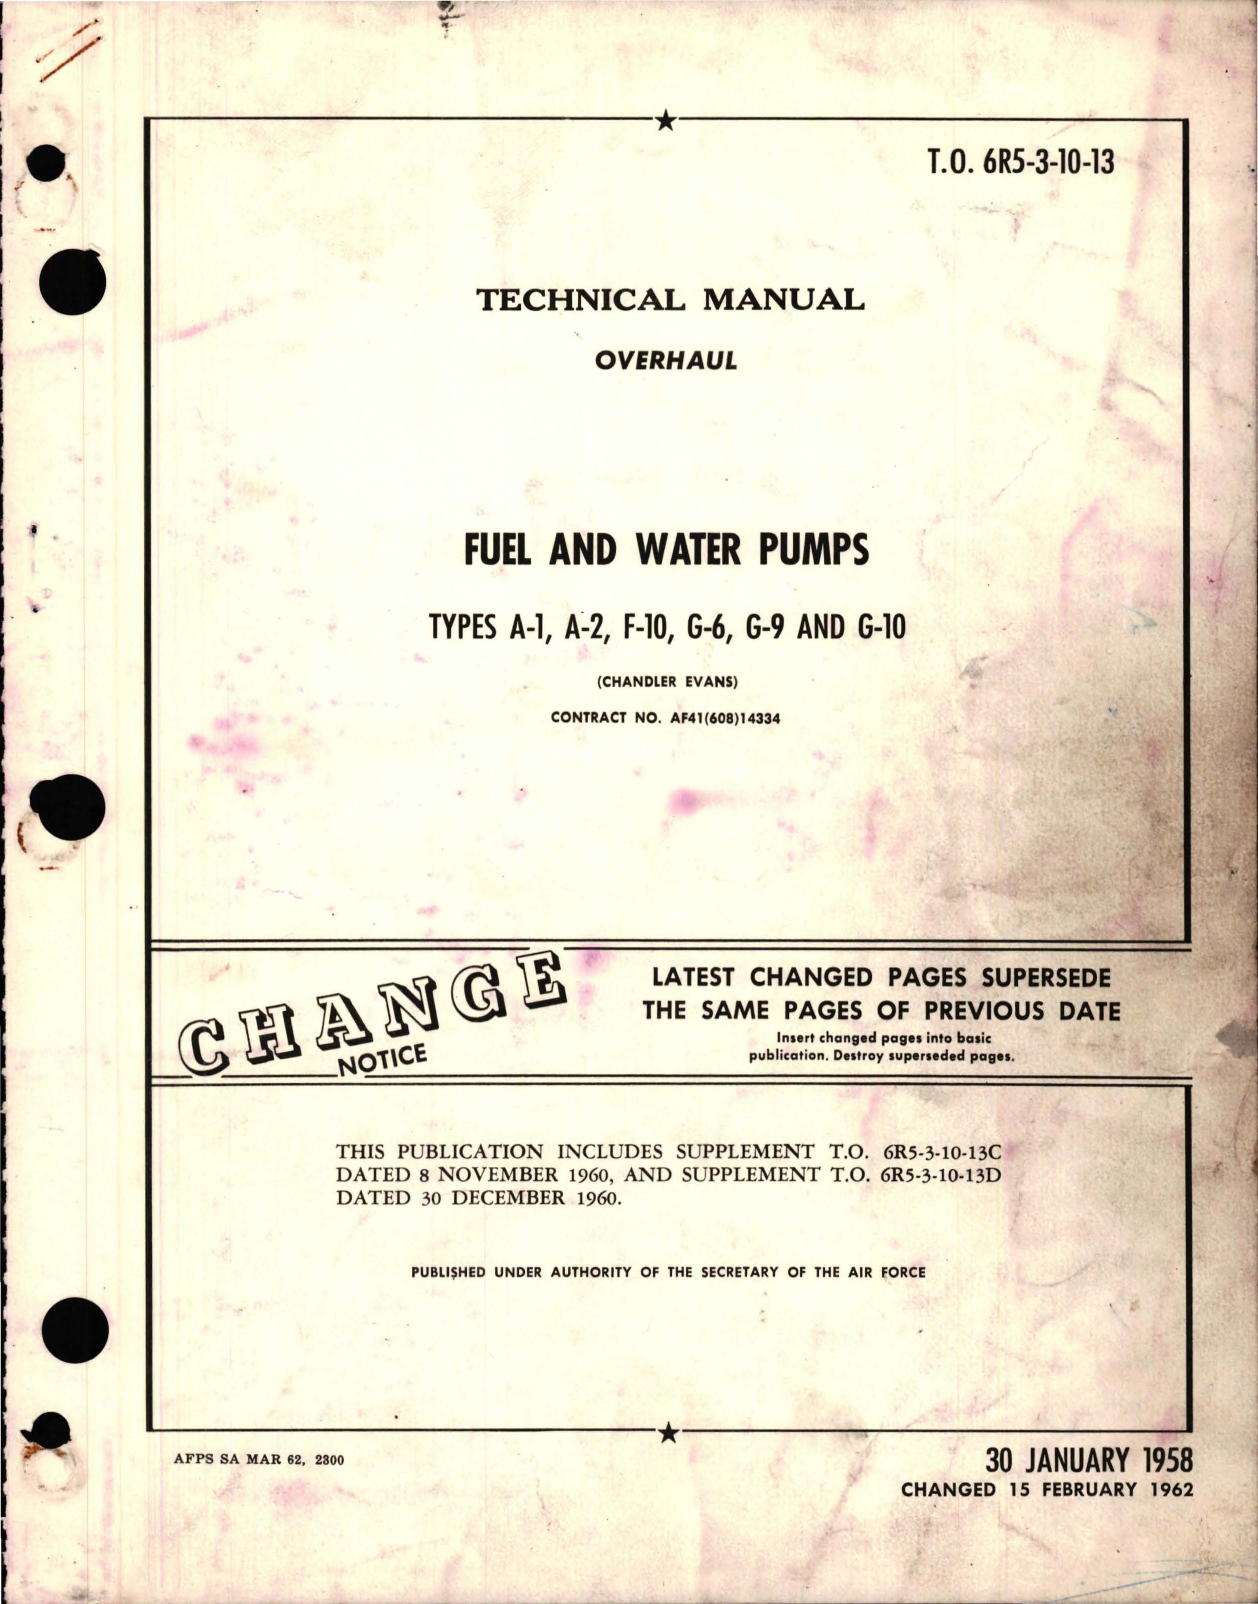 Sample page 1 from AirCorps Library document: Overhaul Instructions for Fuel and Water Pumps - Types A-1, A-2, F-10, G-6, G-9, and G-10